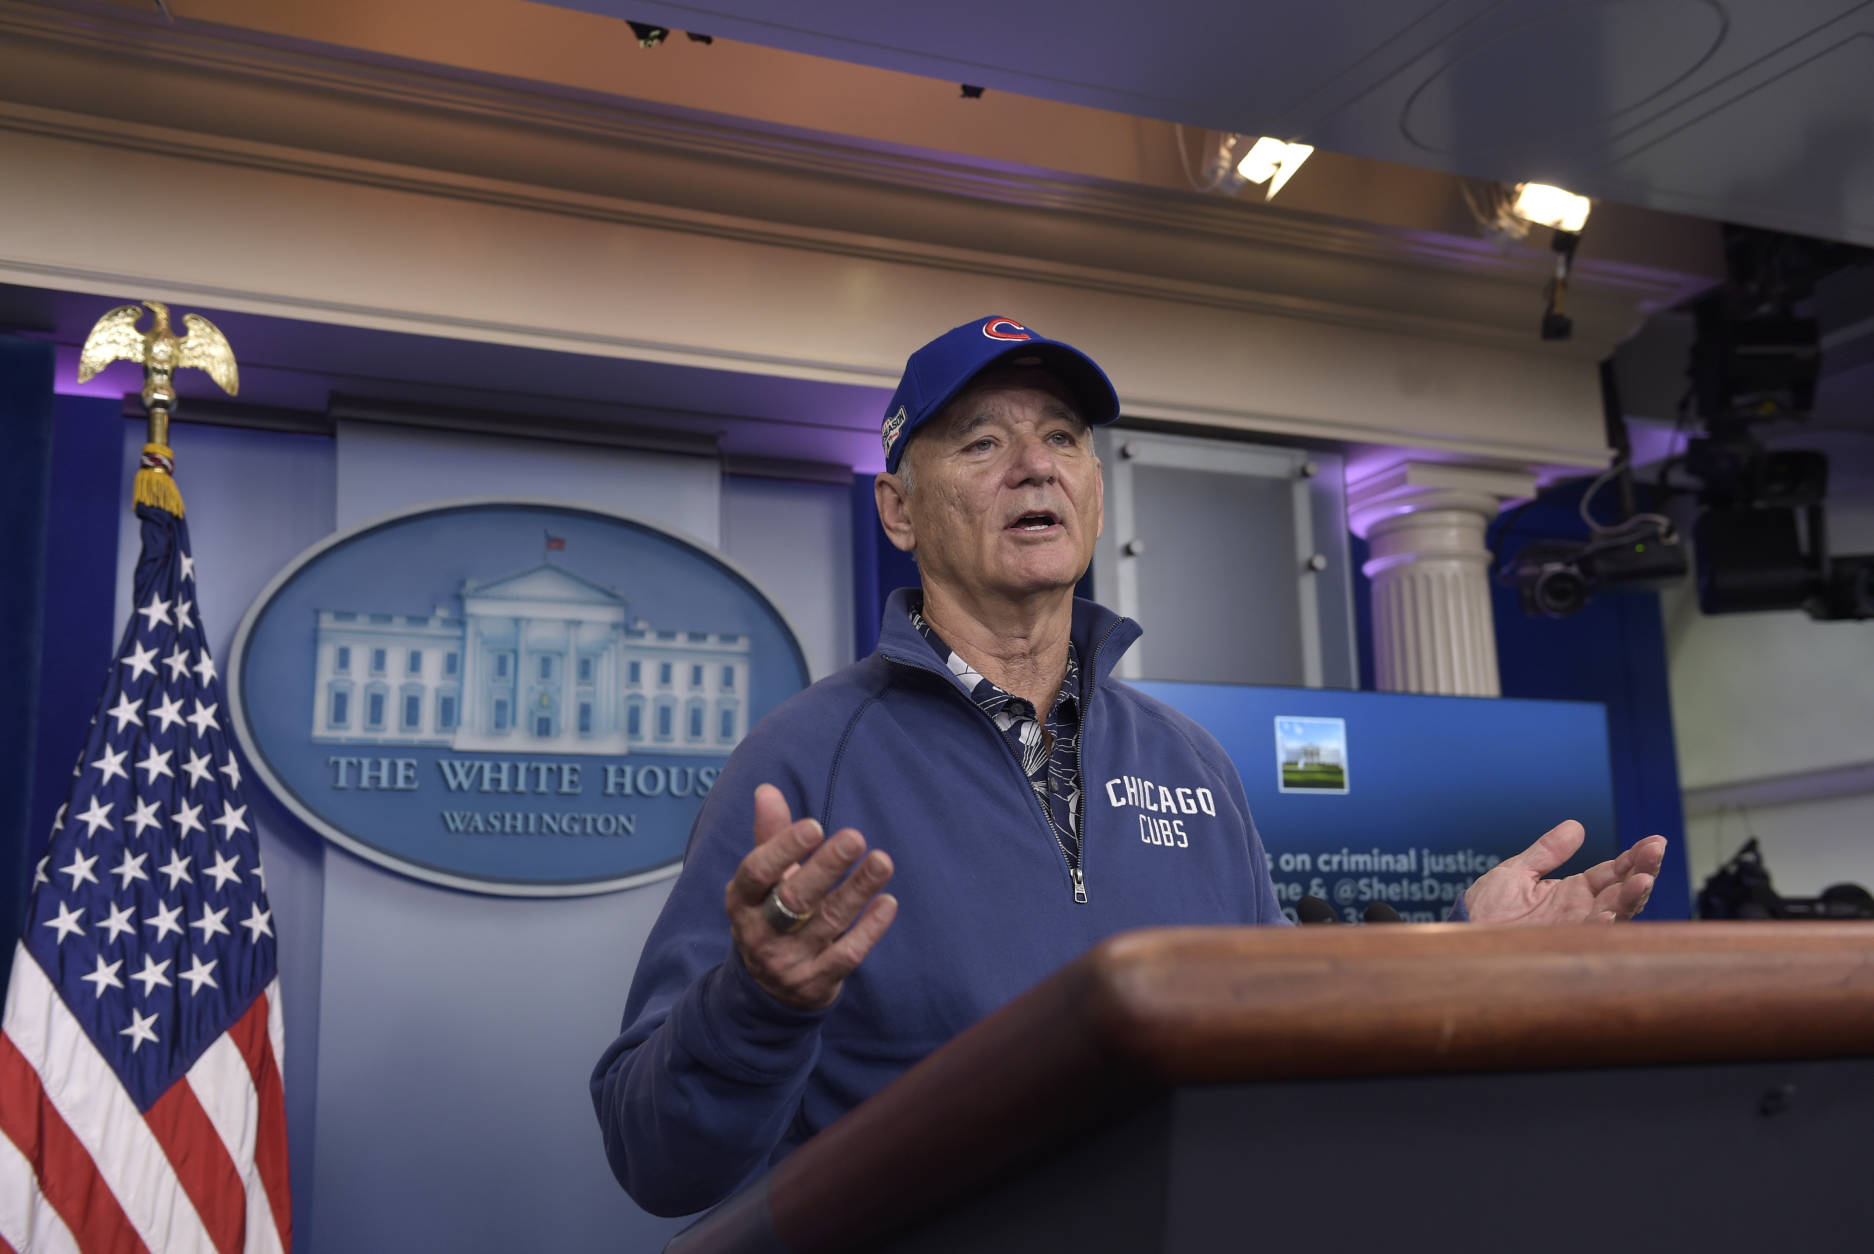 Actor Bill Murray speaks during a visit to the White House briefing room in Washington, Friday, Oct. 21, 2016. Murray is in Washington to receive the Mark Twain Prize for American Humor/ (AP Photo/Susan Walsh)